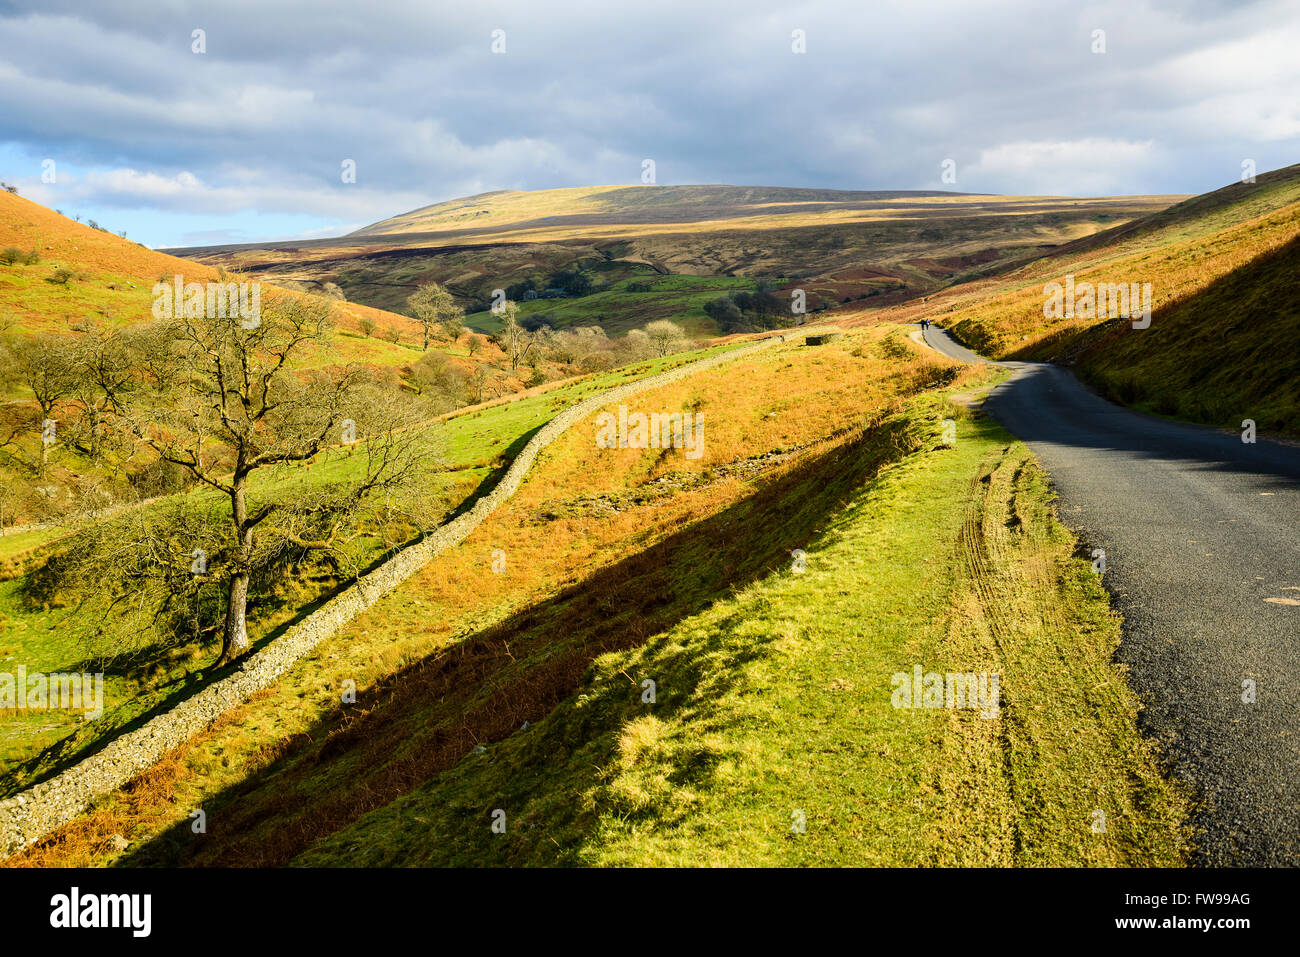 Road in Barbondale Cumbria. With effect from August 2016 this area becomes part of the Yorkshire Dales National Park. Stock Photo